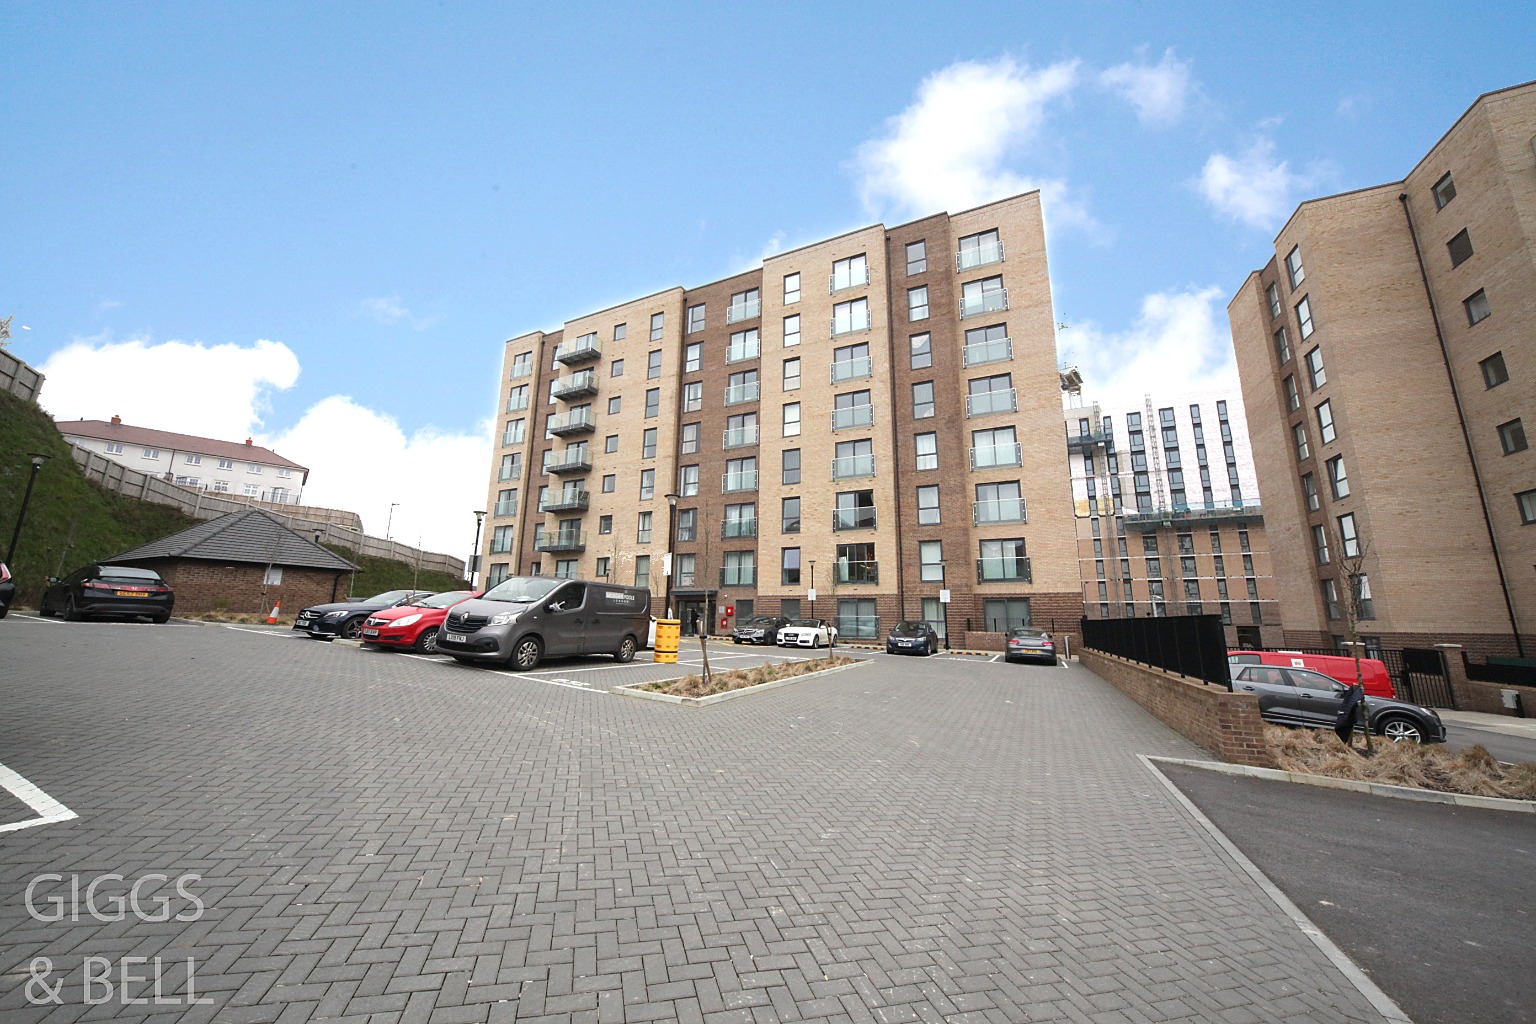 1 bed flat for sale, Luton  - Property Image 1